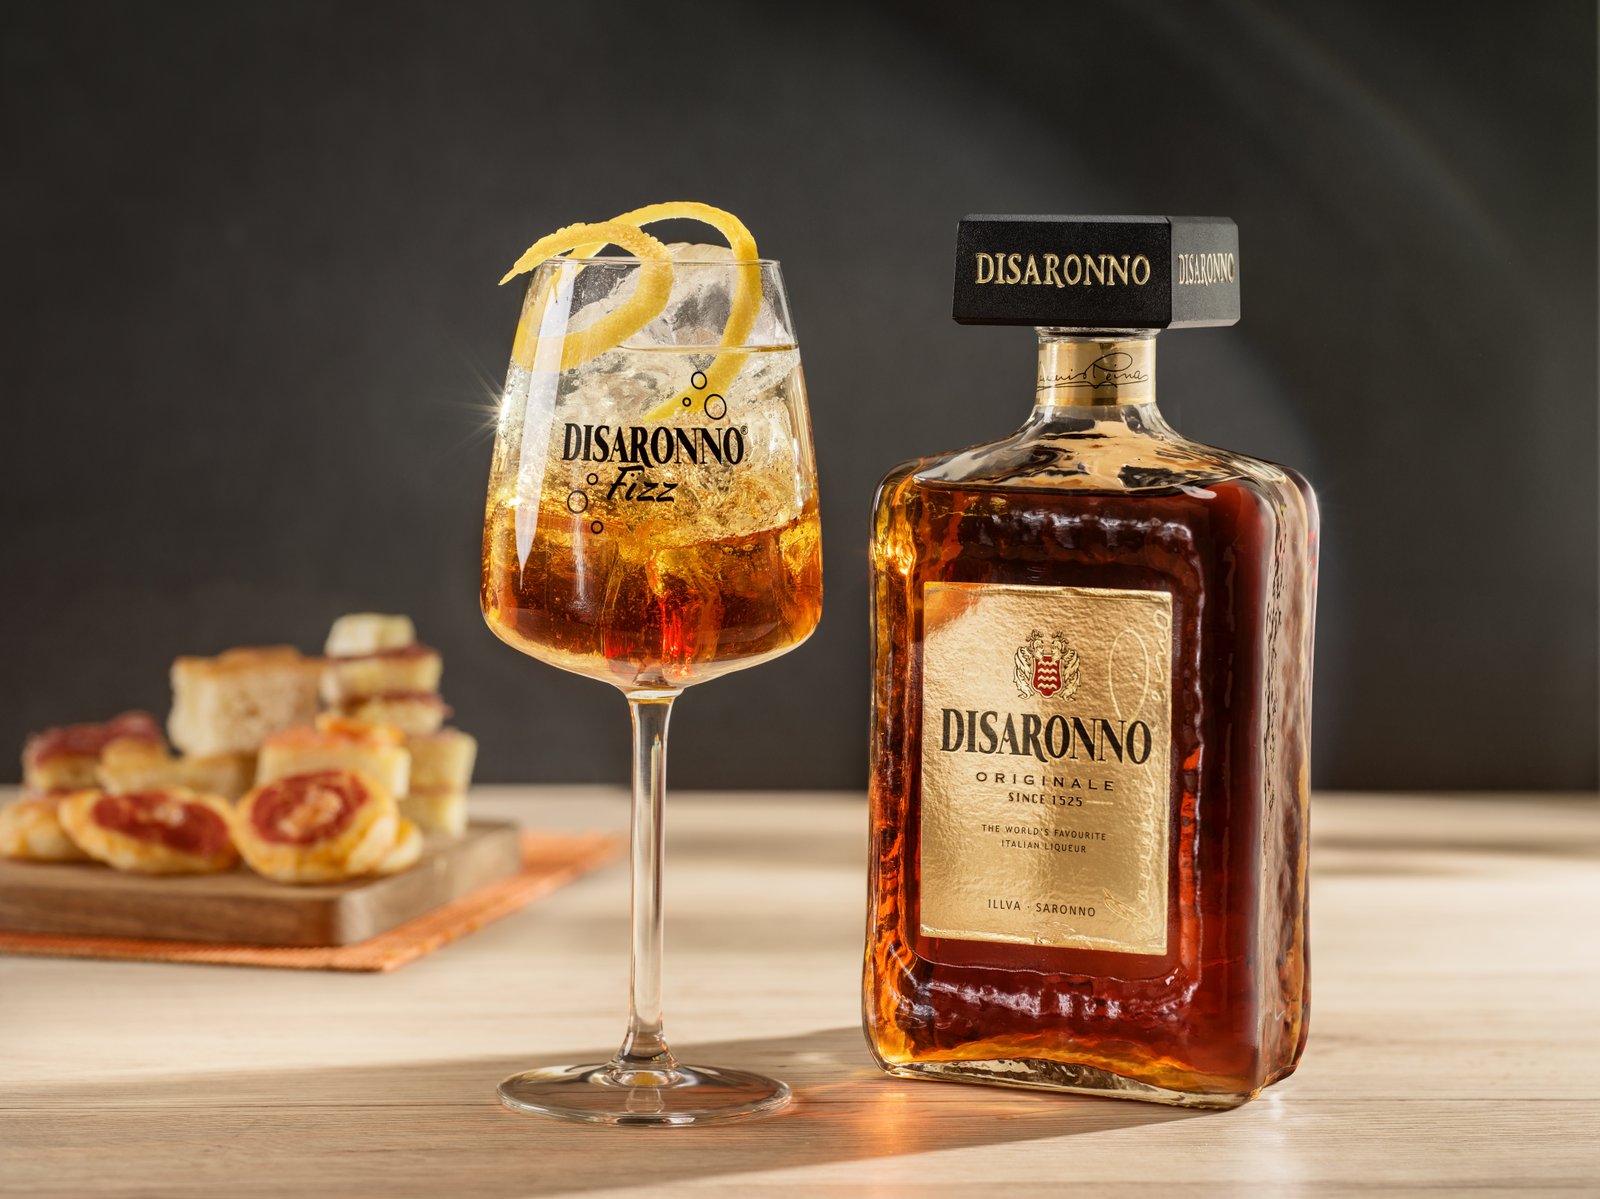 Endless Dolce Vita with Disaronno Originale and Q Mixers